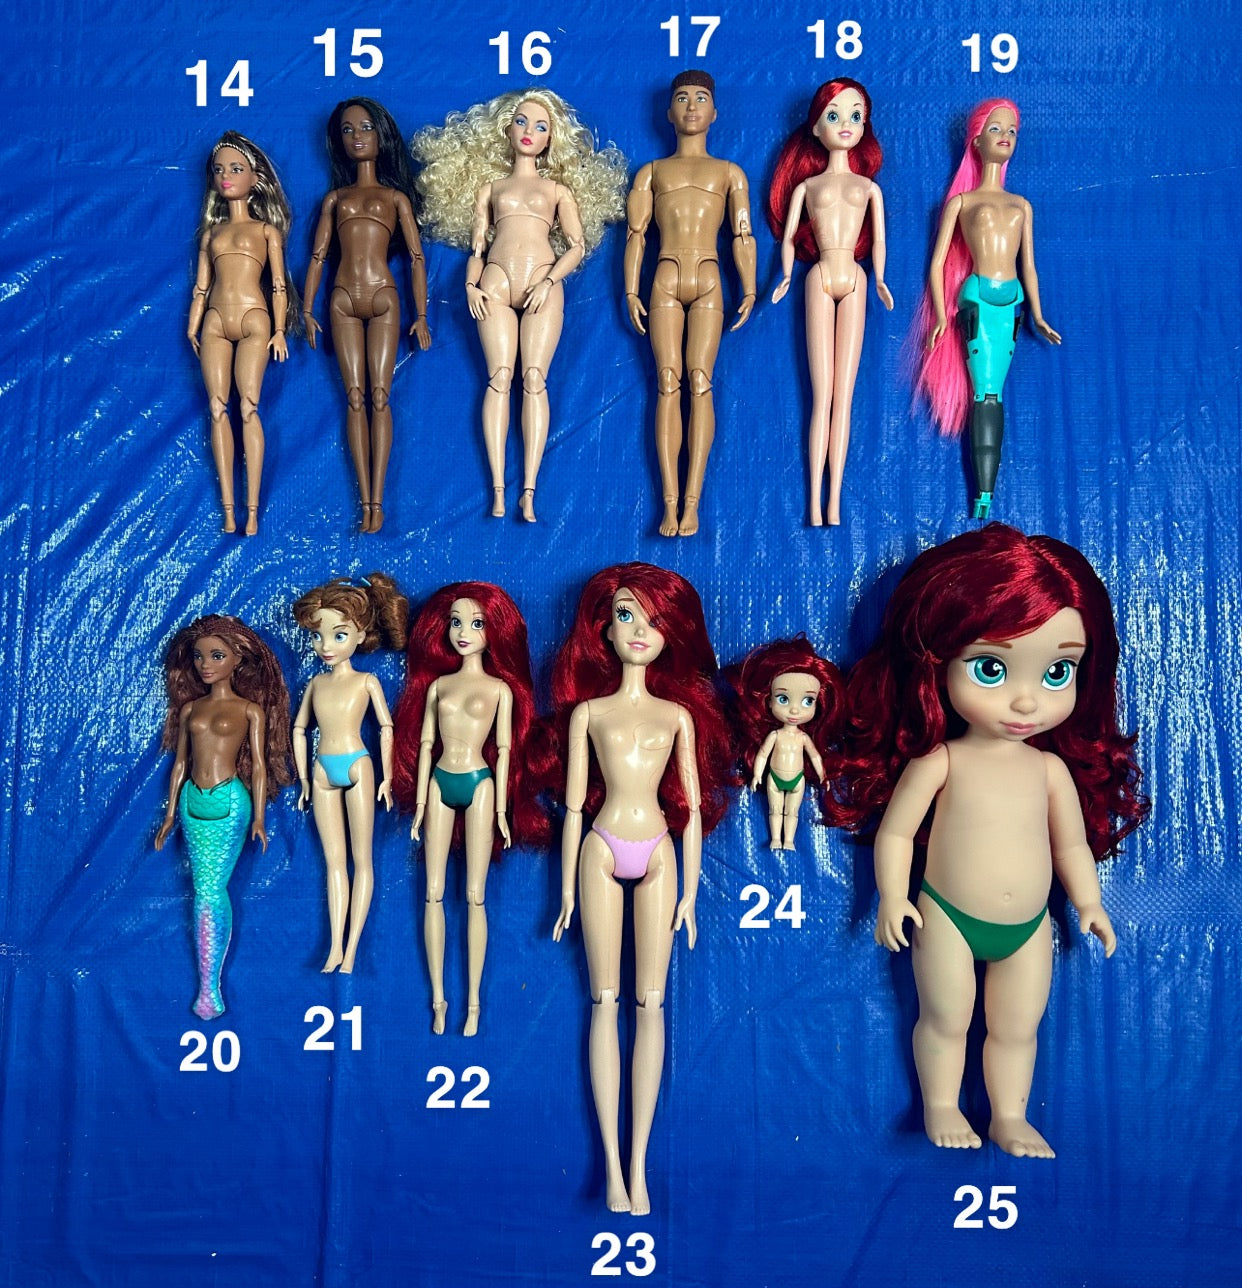 Tim silicone mermaid tail for doll (doll not included)